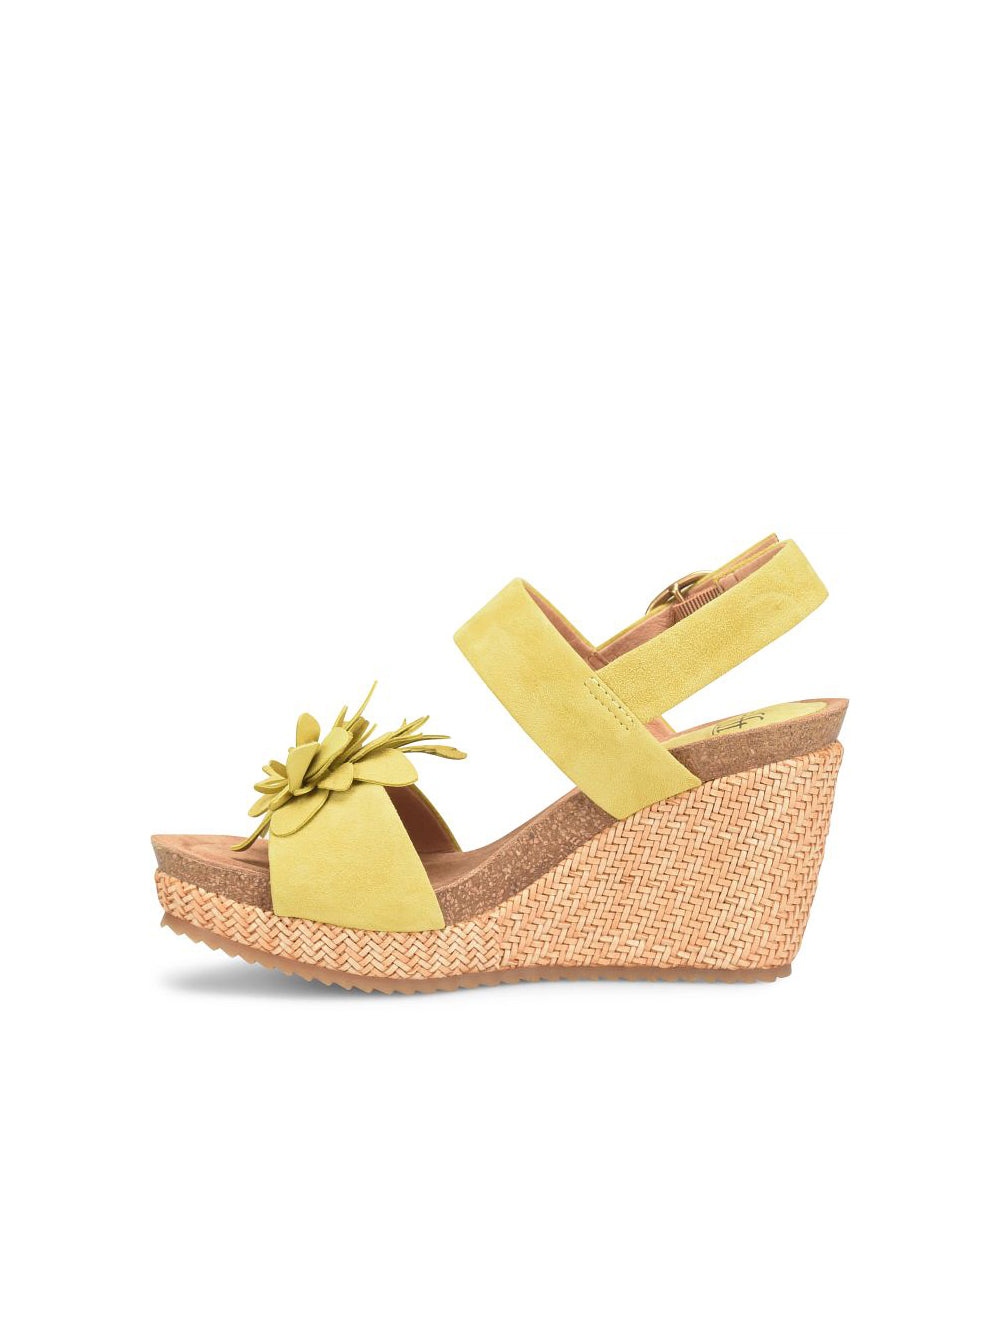 sofft shoes cali flower platform wedge sandals in citron yellow